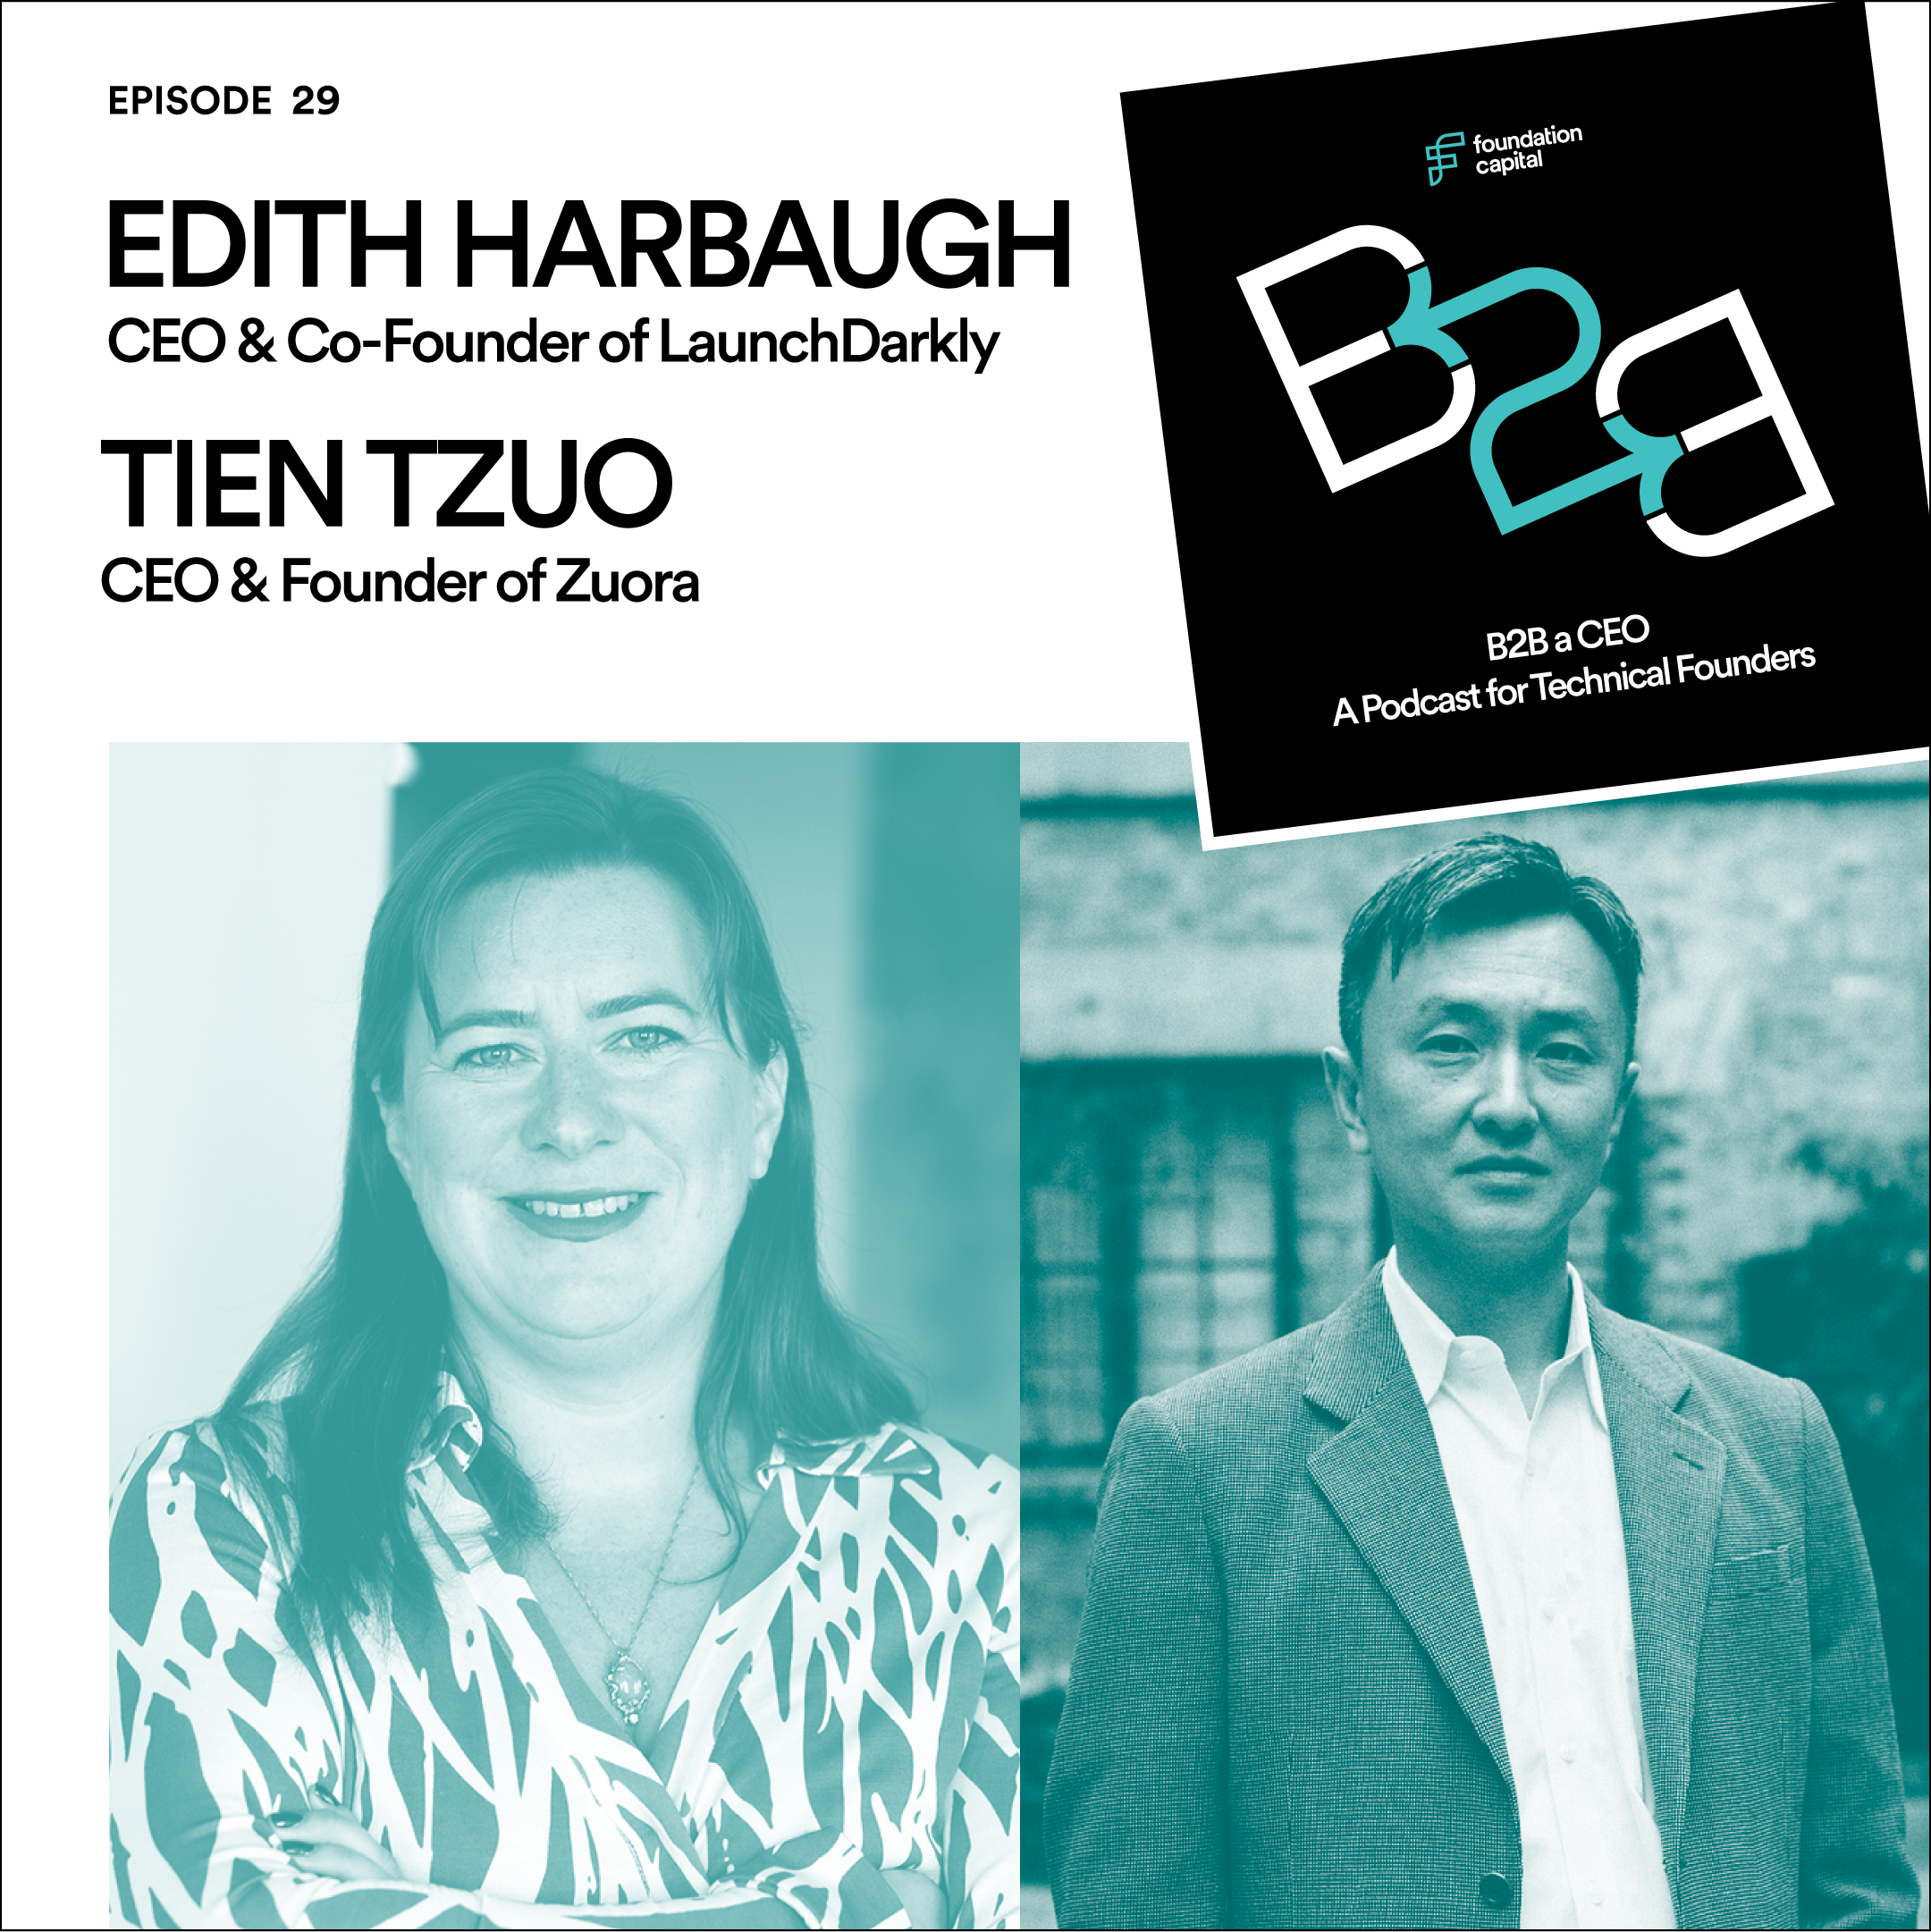 edith harbaugh ceo and co founder of launchdarkly, and tien tzuo ceo and co founder of zuora